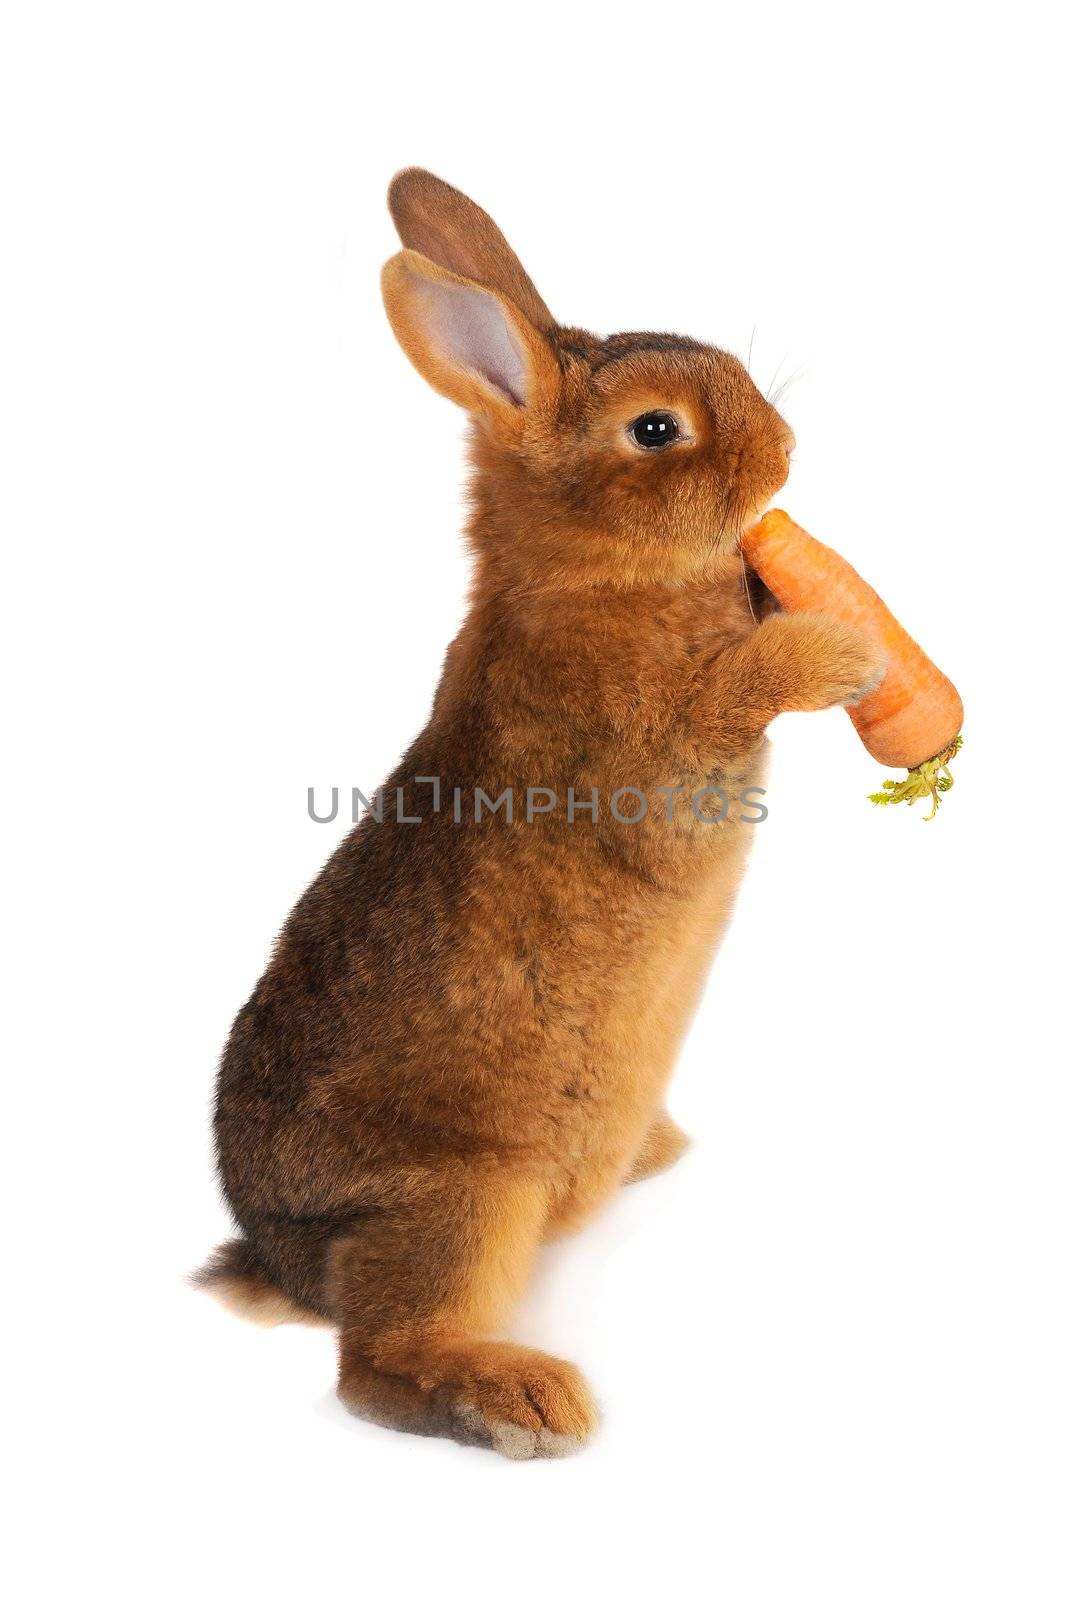 Rabbit with carrot in paws �n a white background